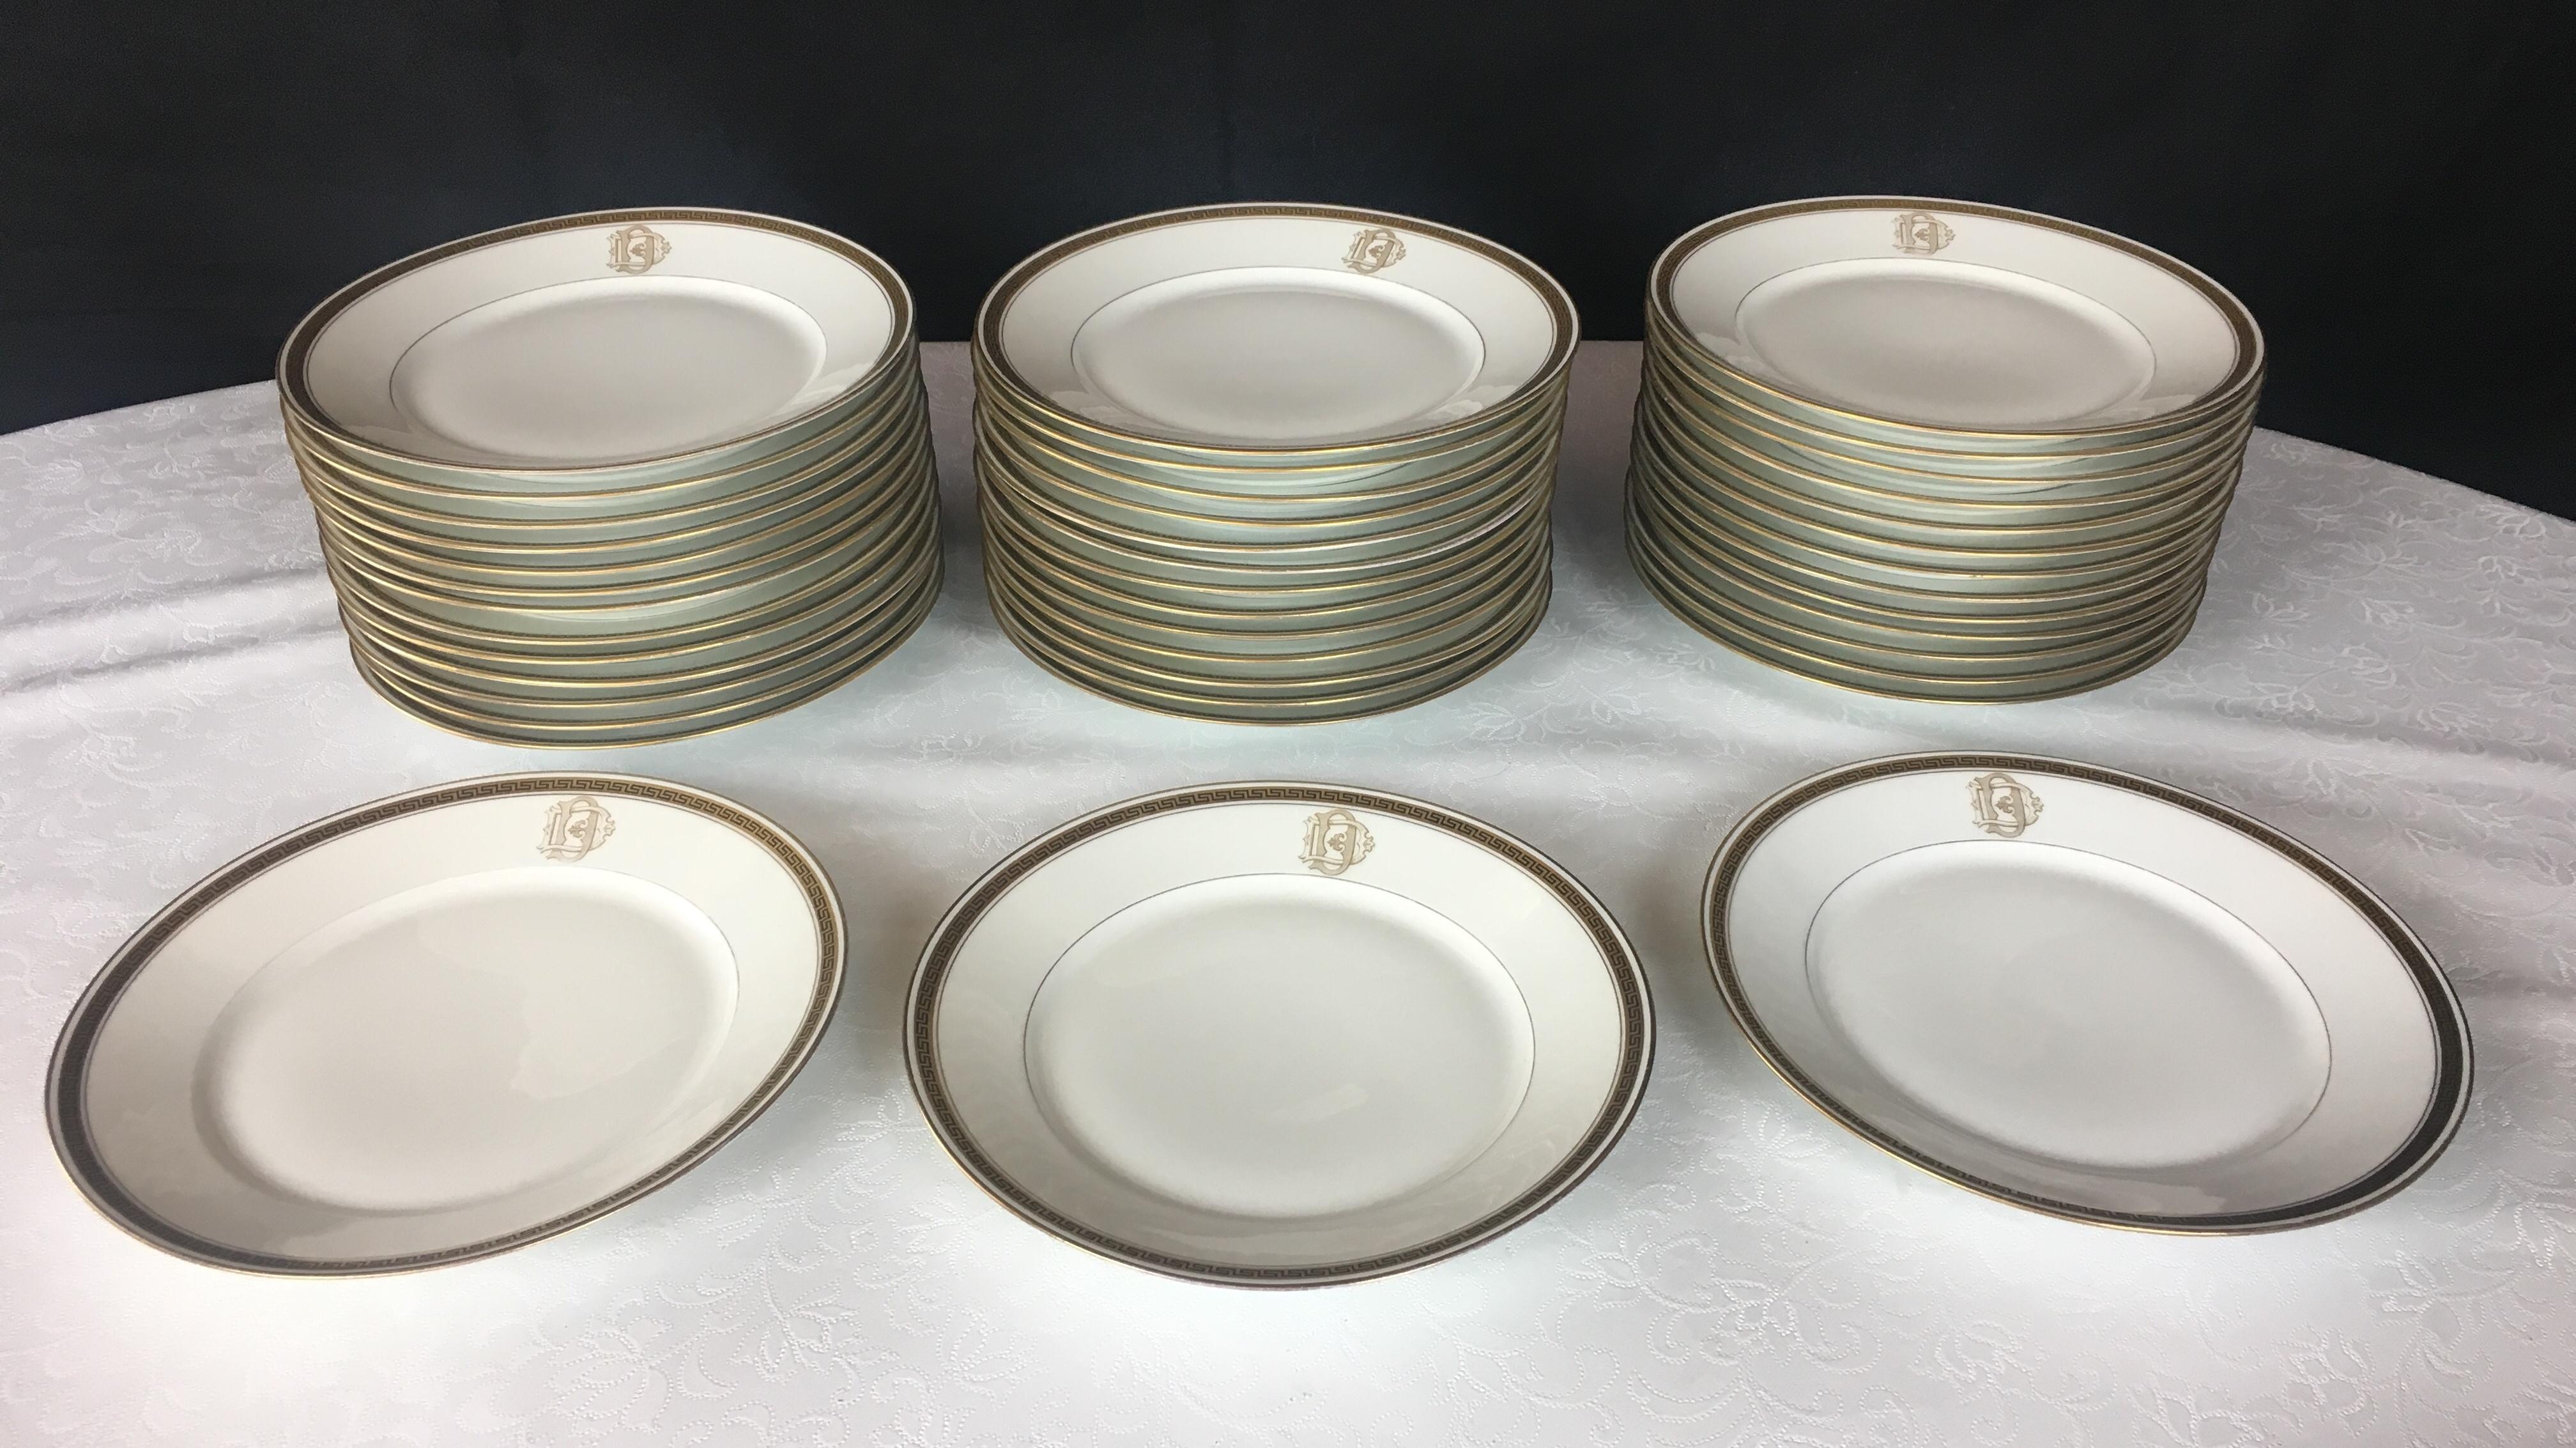 An exceptionally beautiful 98 piece French Limoges dinner service. Trimmed with brilliant gold bands, this set is in excellent antique condition. It is monogrammed with the letter 